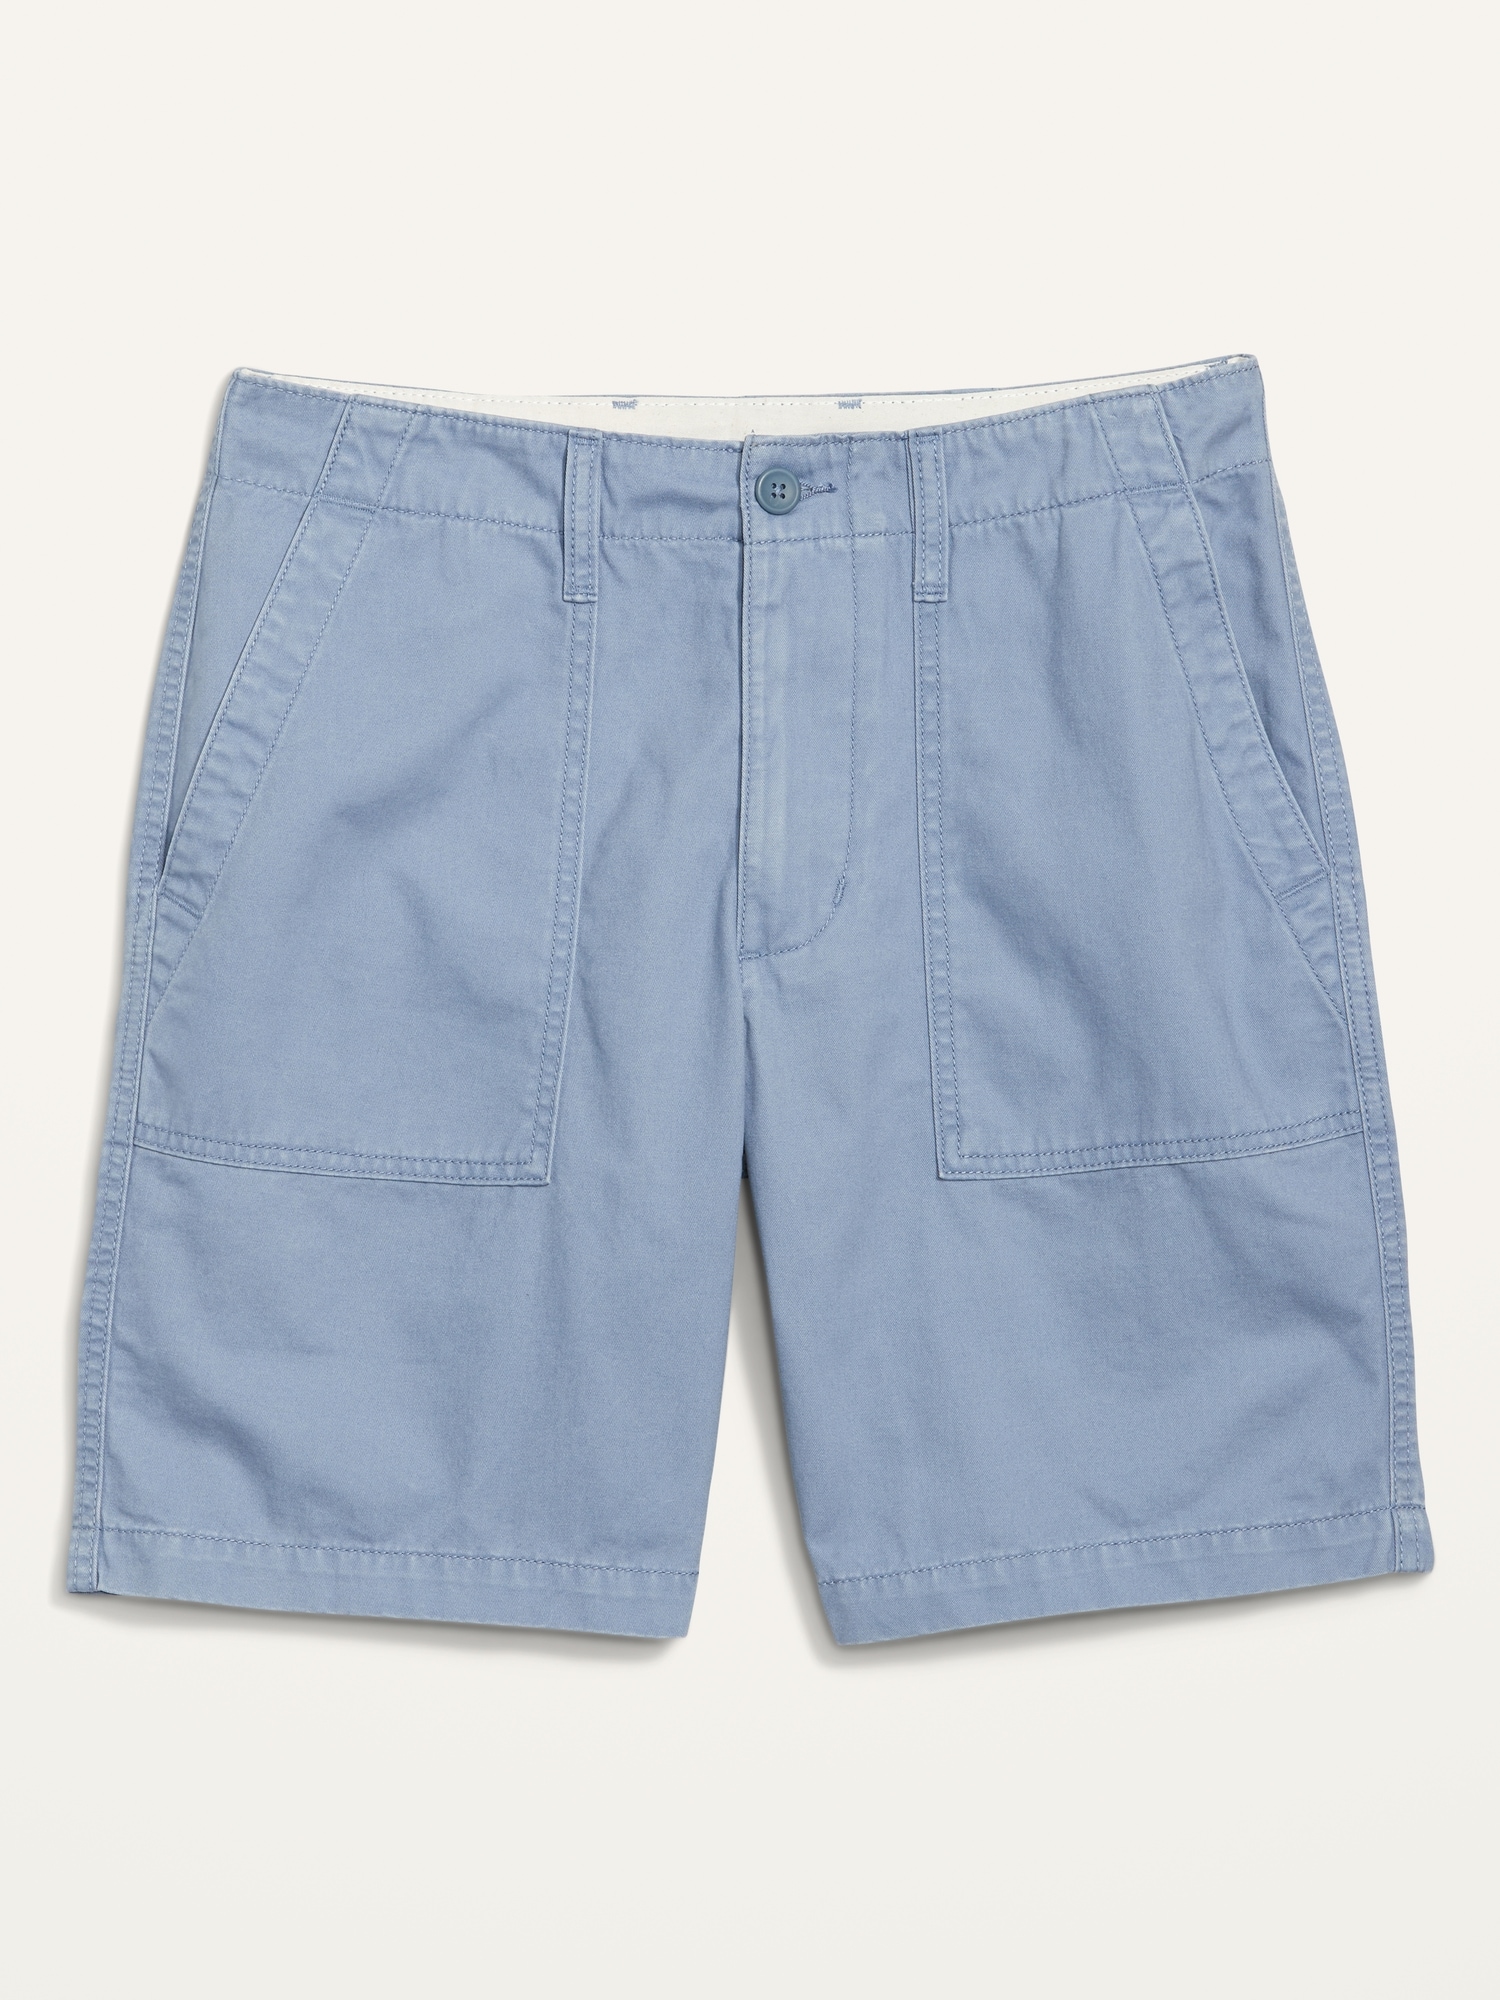 Straight Lived-In Khaki Shorts -- 9-inch inseam | Old Navy